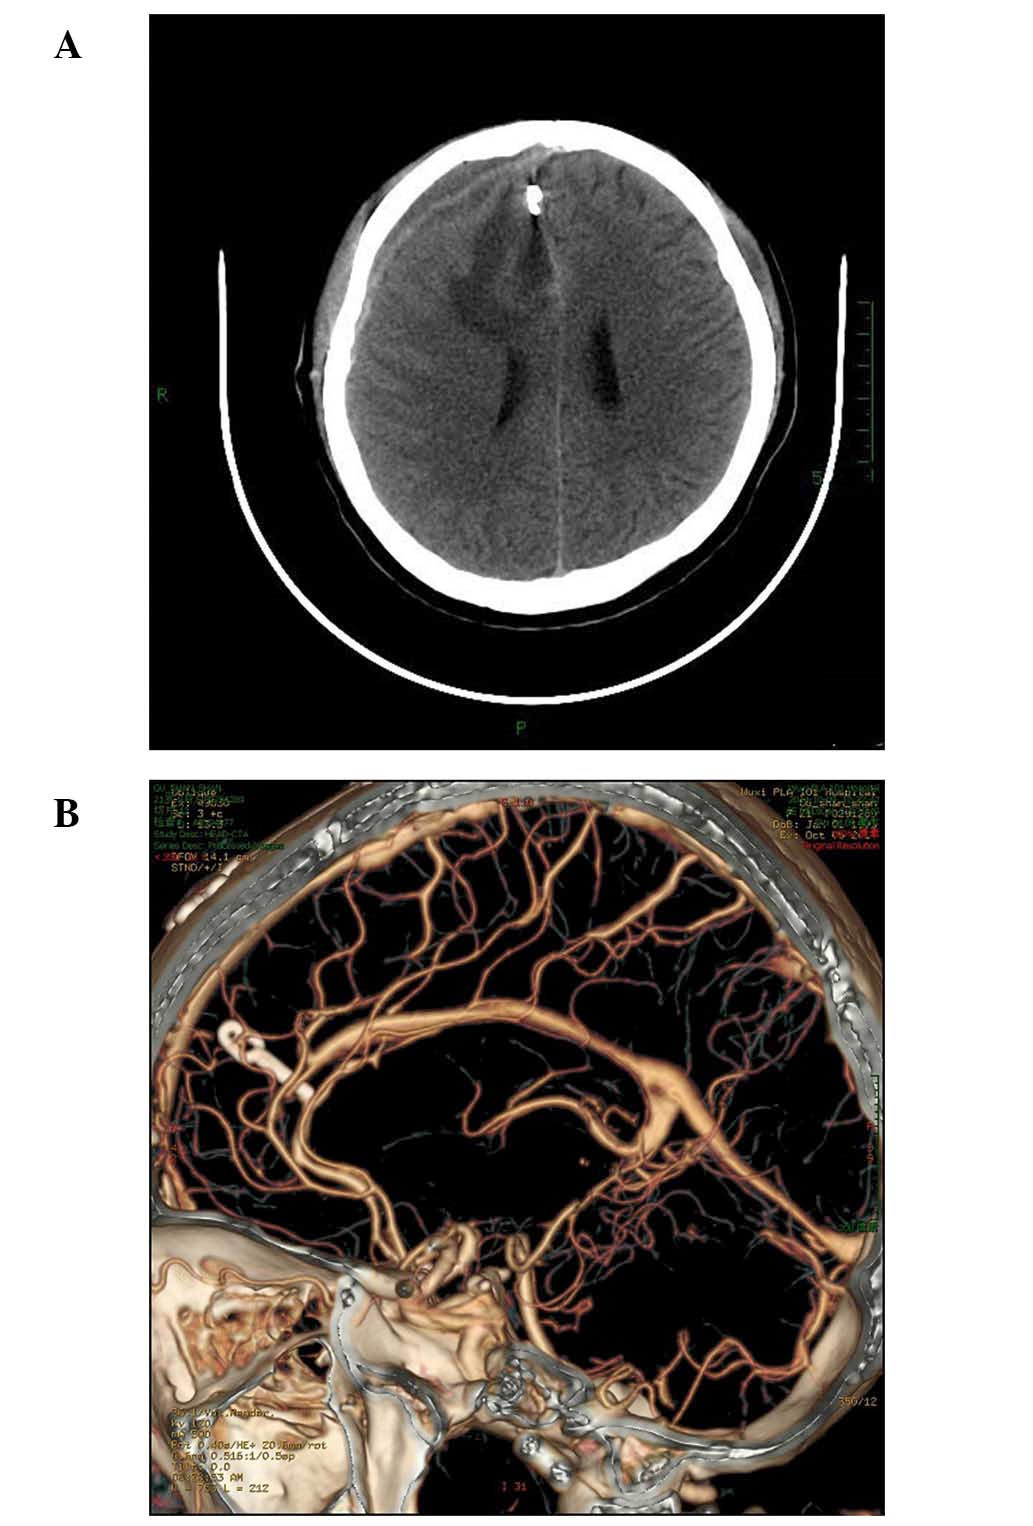 Treatment Of A Giant Arteriovenous Malformation Associated With Intracranial Aneurysm Rupture